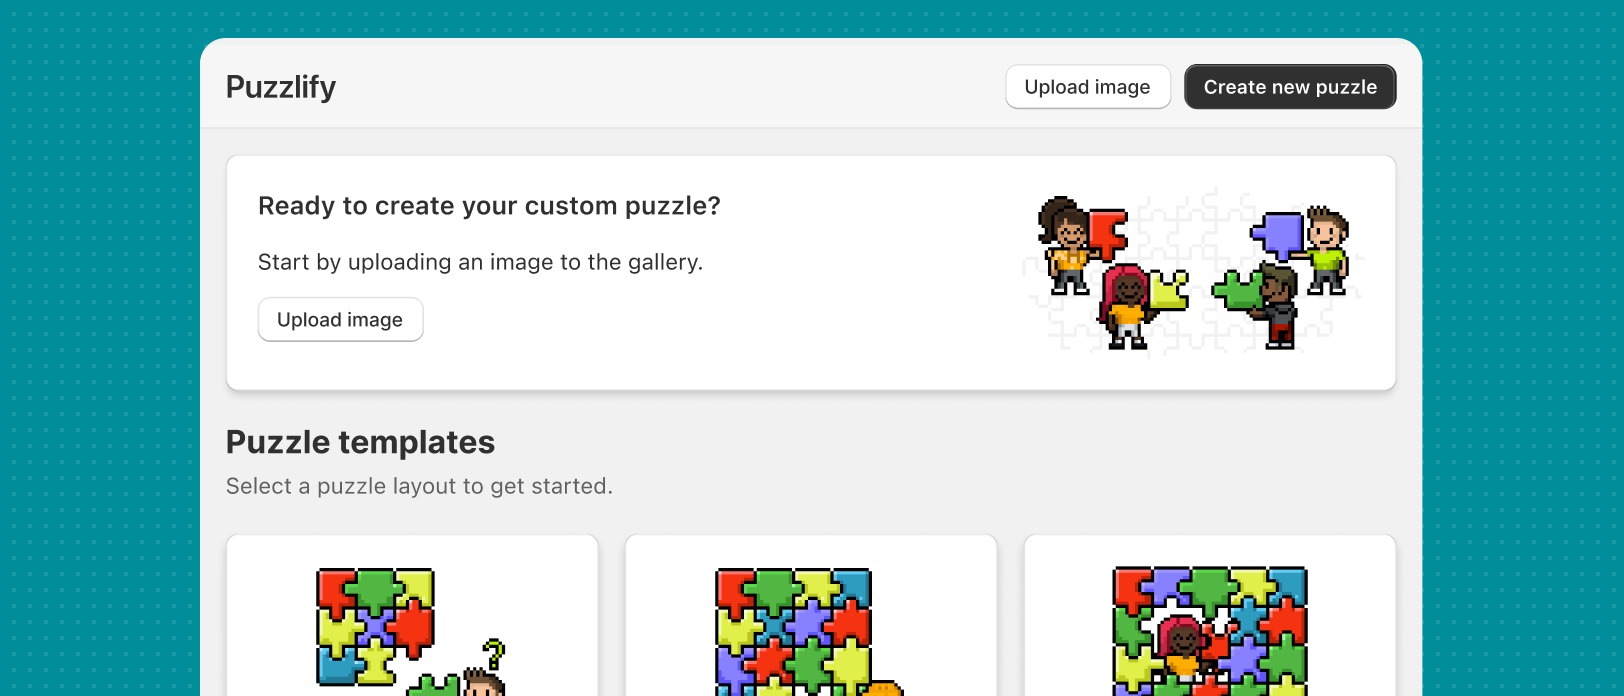 Stylized pixel art puzzles within an app interface that looks like the Shopify admin.